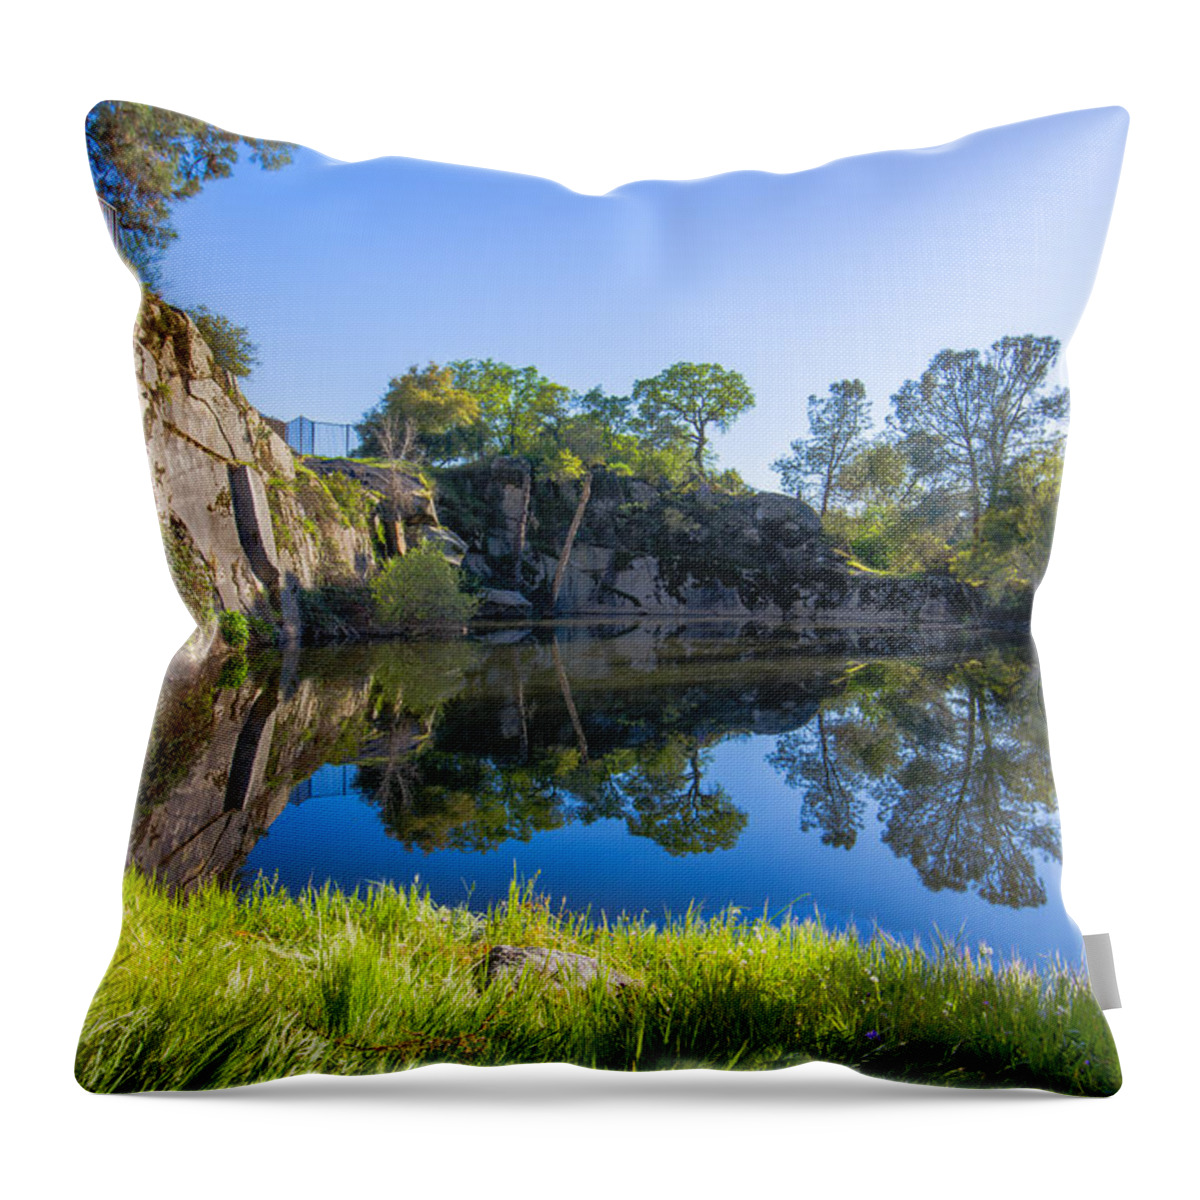 Copp's Quarry Throw Pillow featuring the photograph Copp's Quarry by Jim Thompson